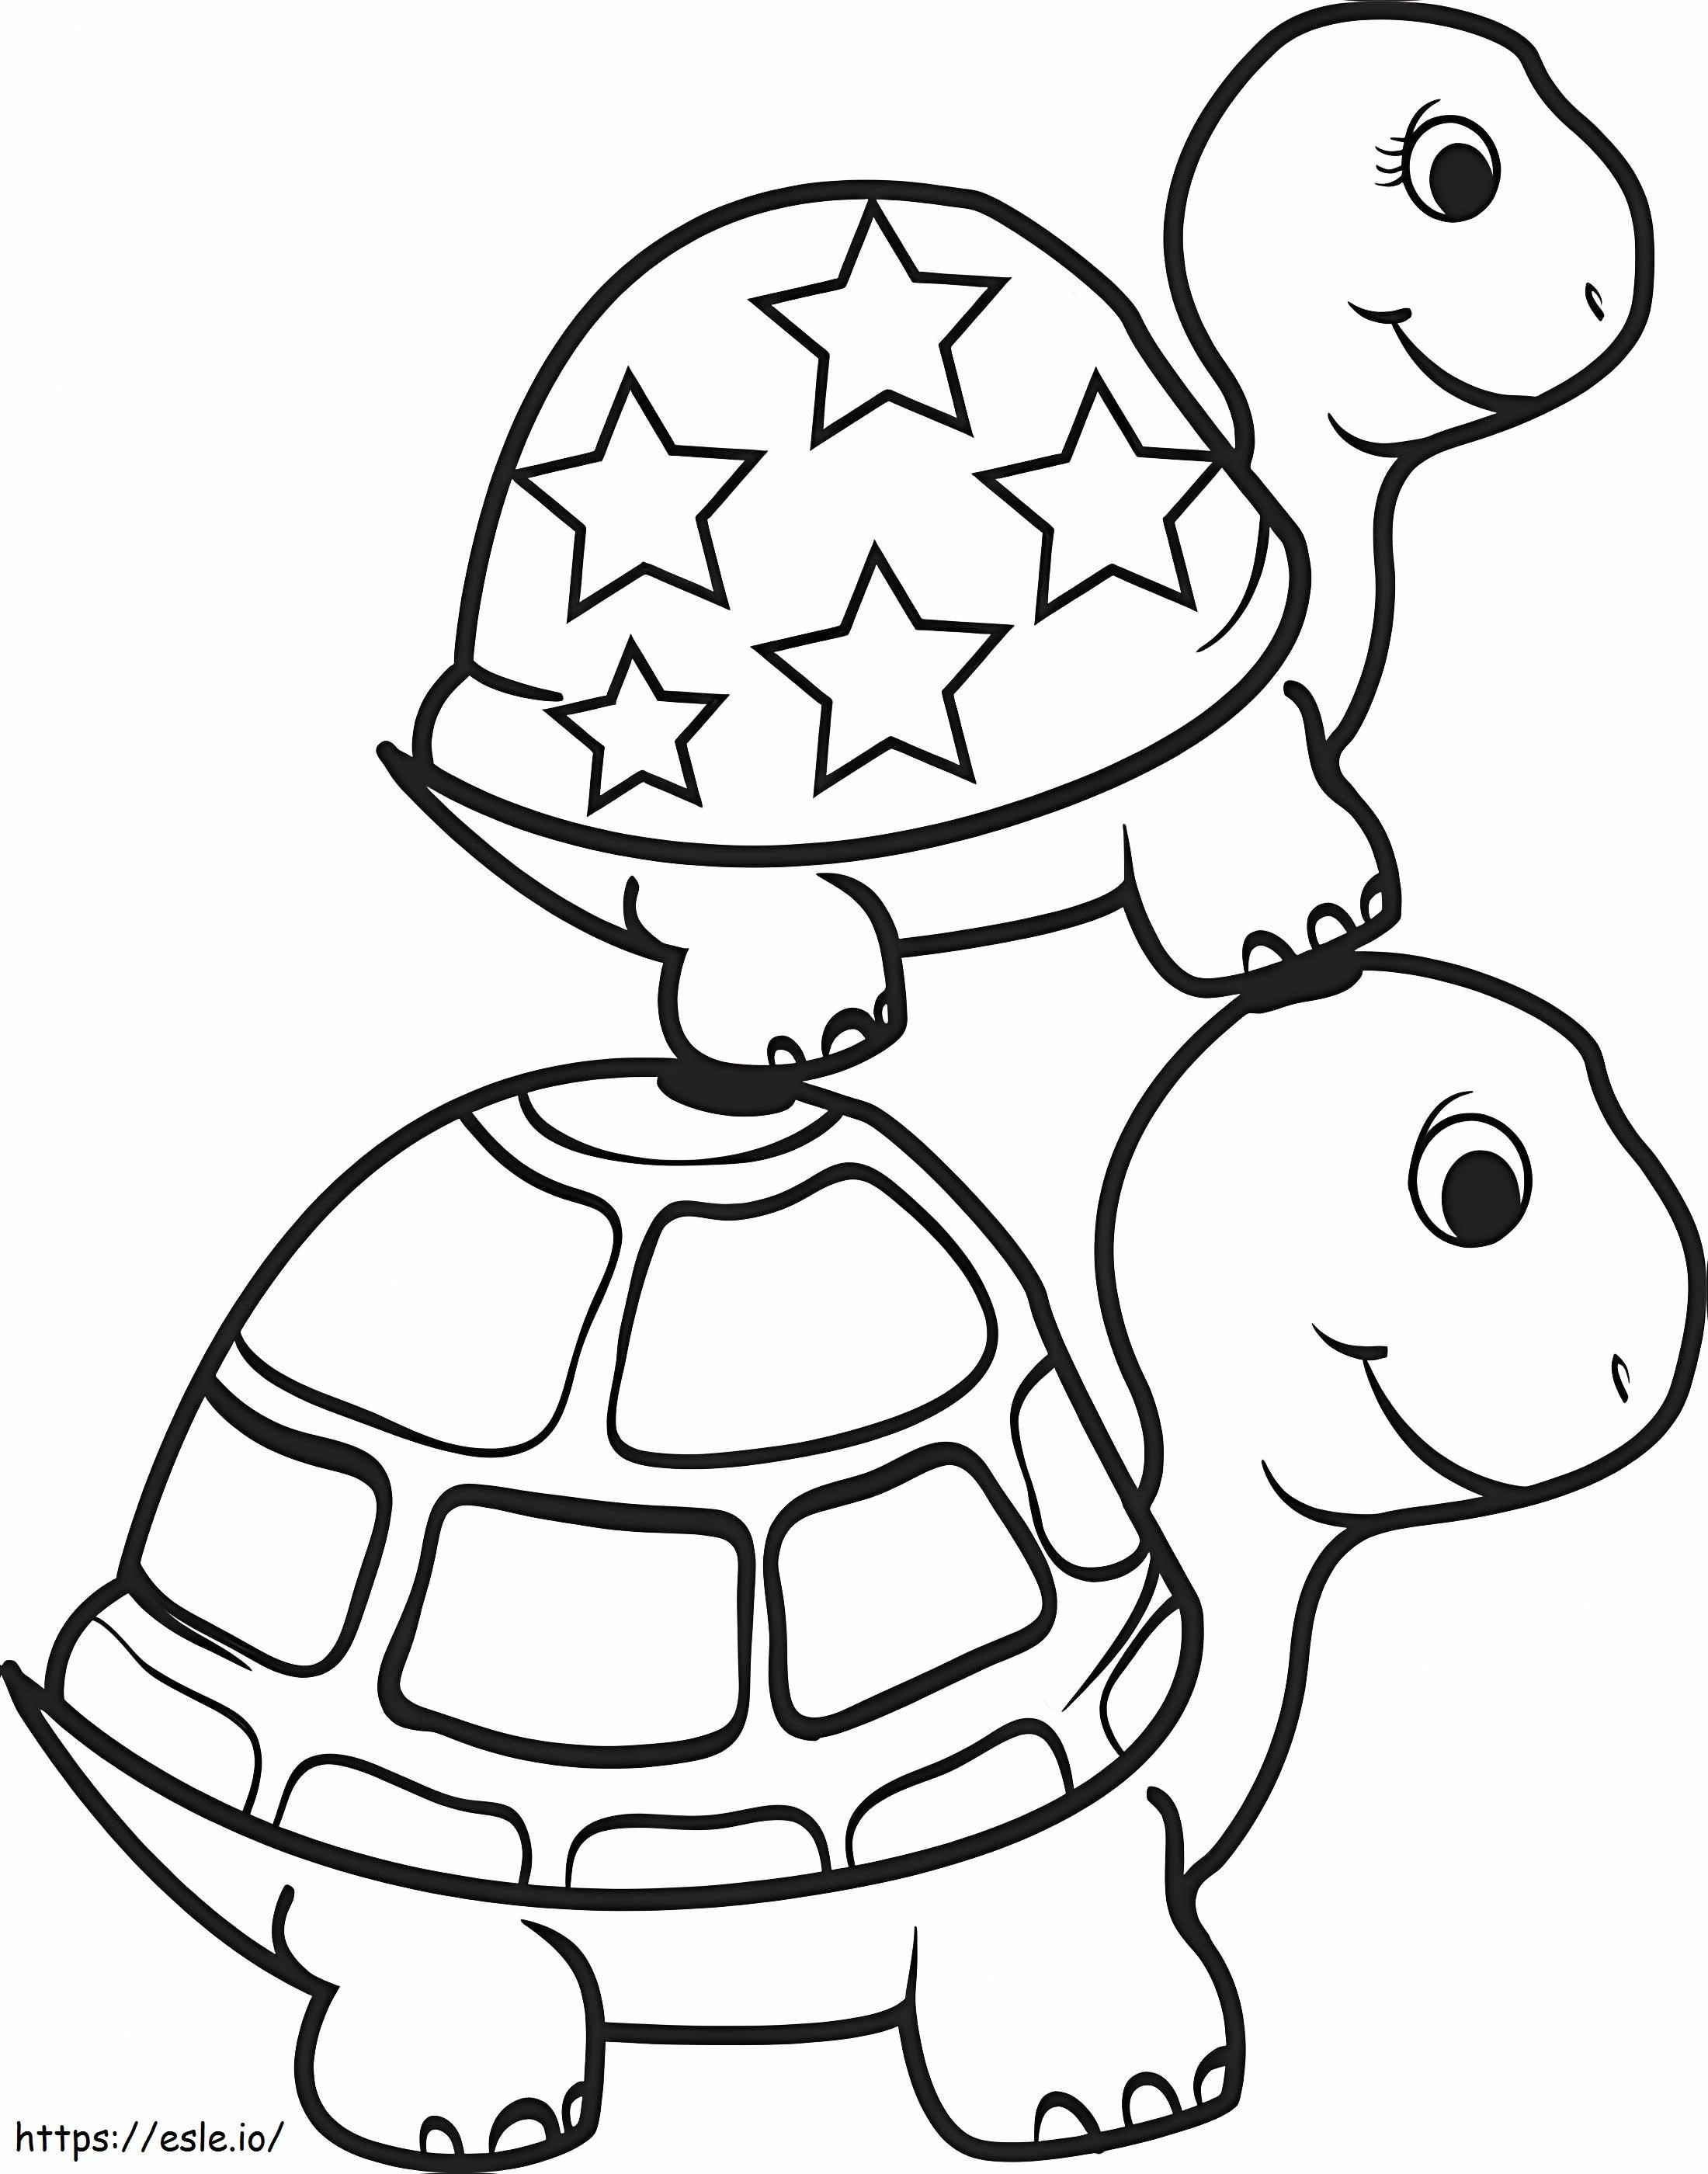 Two Turtle Brothers coloring page